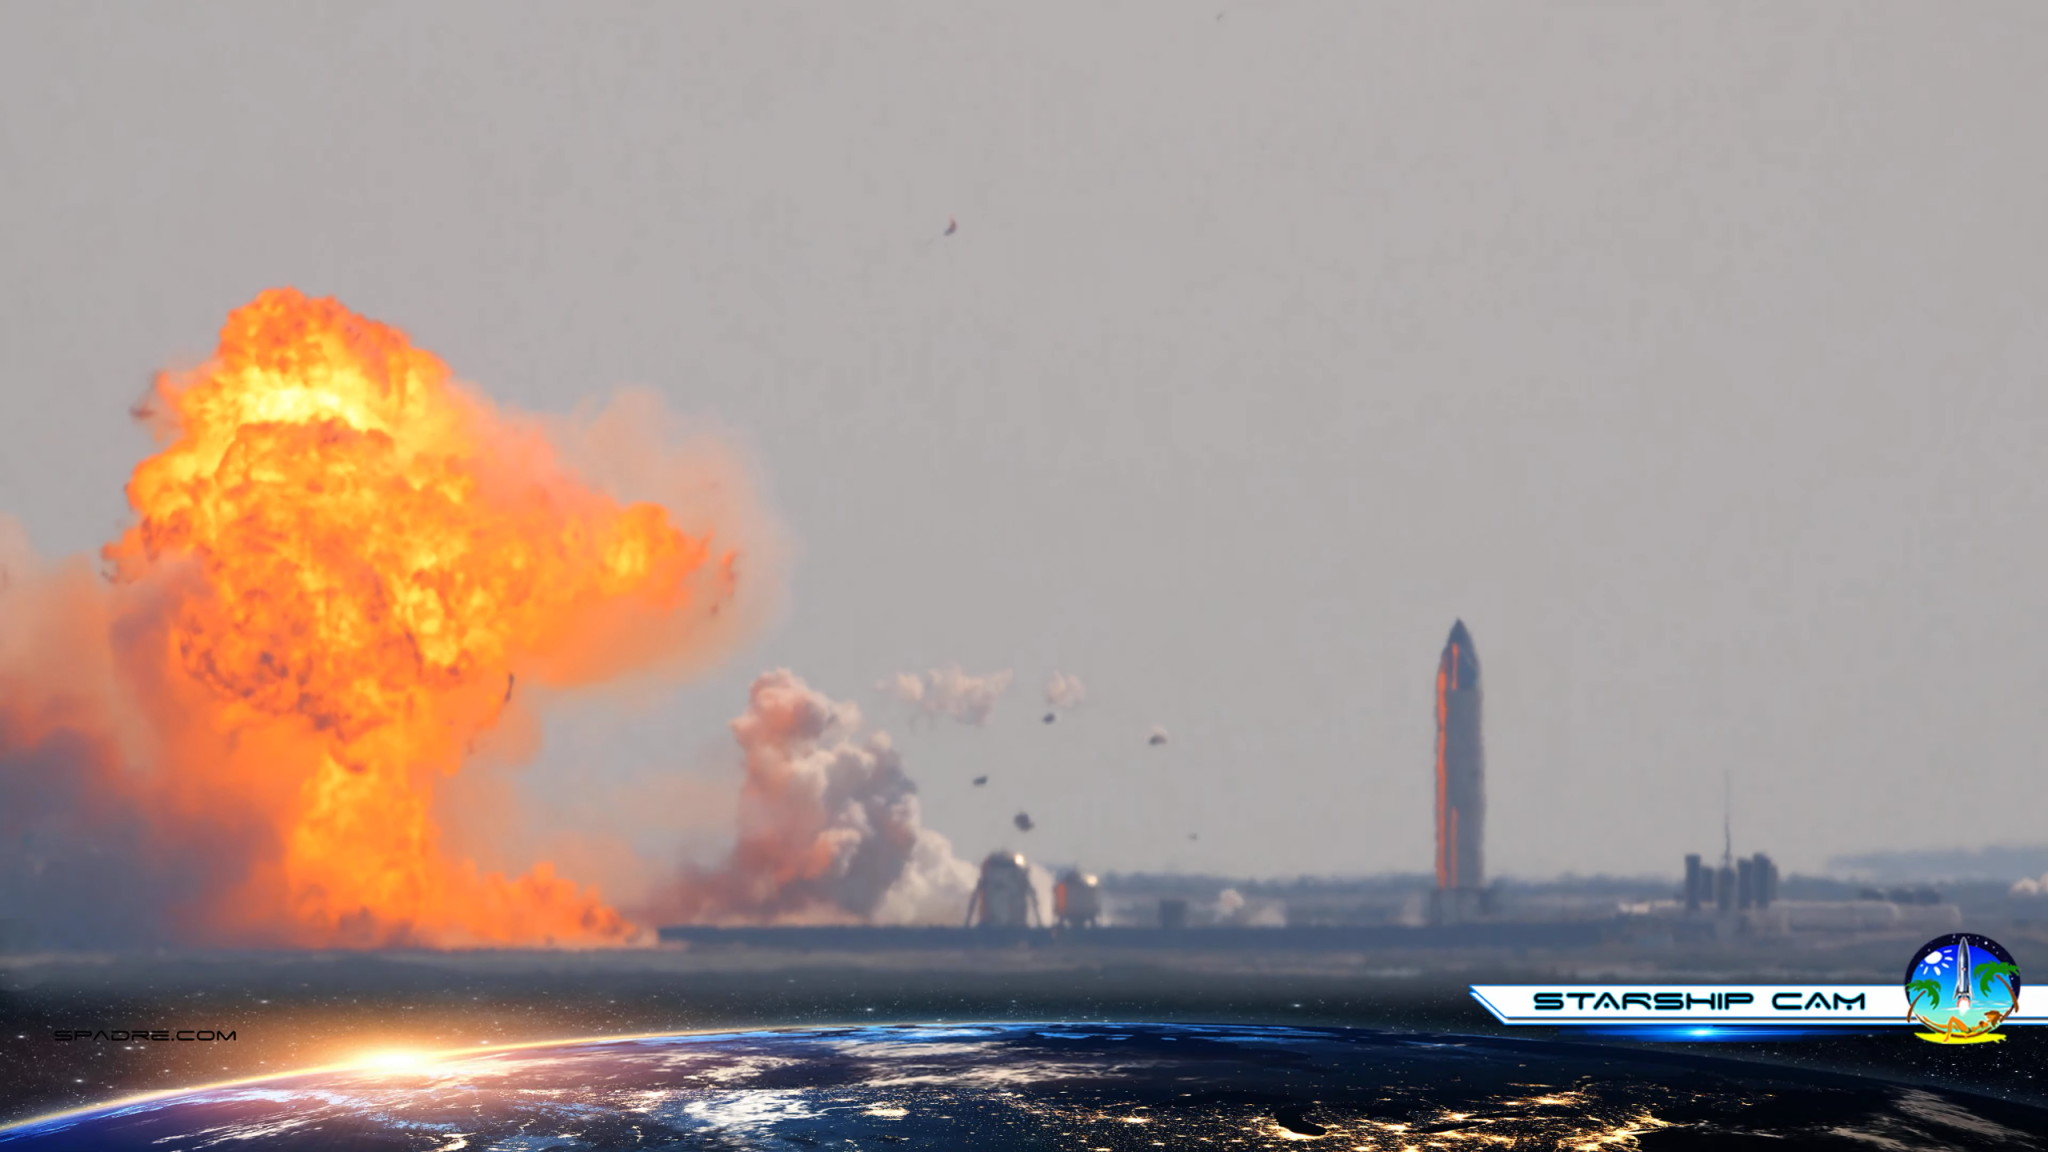 SpaceX's new Starship rocket prototype soared 6 miles above Texas, but exploded during a landing attempt